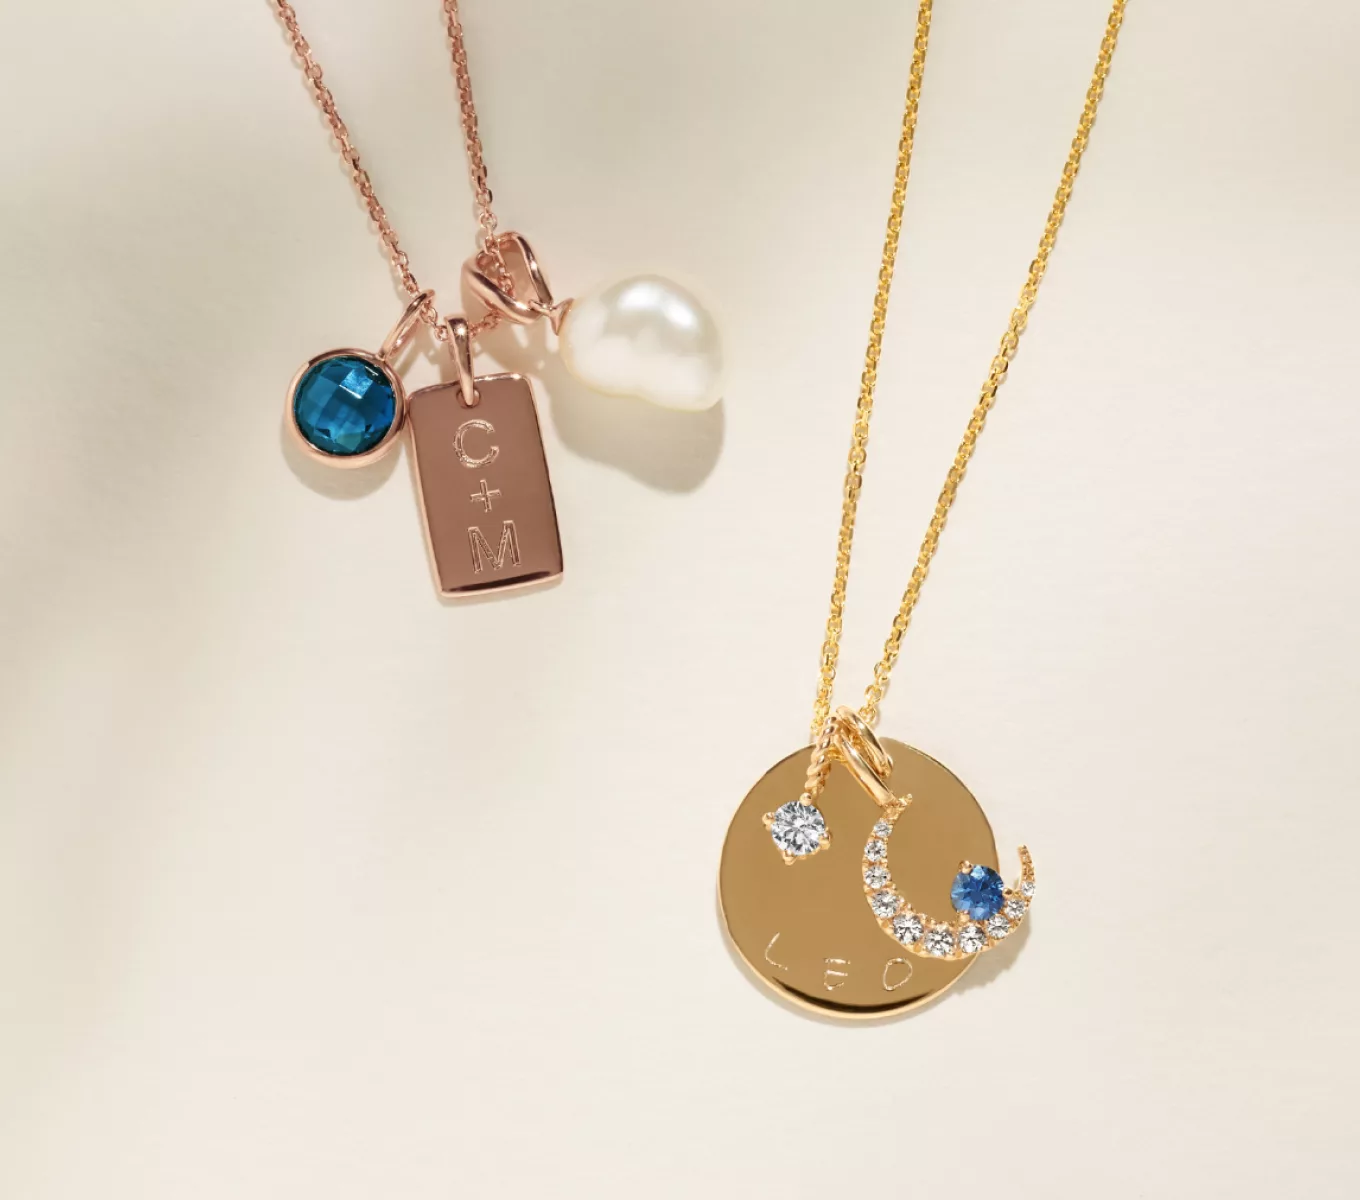 Image of Top Group: Diamond Cut Cable Chain in 14k Rose Gold, London Blue Topaz Charm in 14k Rose Gold, Rectangle Charm in 14k Yellow Gold, 8mm Baroque Cultured Freshwater Pearl Charm
Bottom Group: 14k Yellow Gold Adjustable Cable Chain, 5/8 Inch Engravable Disk Charm in 14k Yellow Gold, 14k Yellow Gold Gemstone Charm, Crescent Moon White Sapphire Charm in 14k Yellow Gold